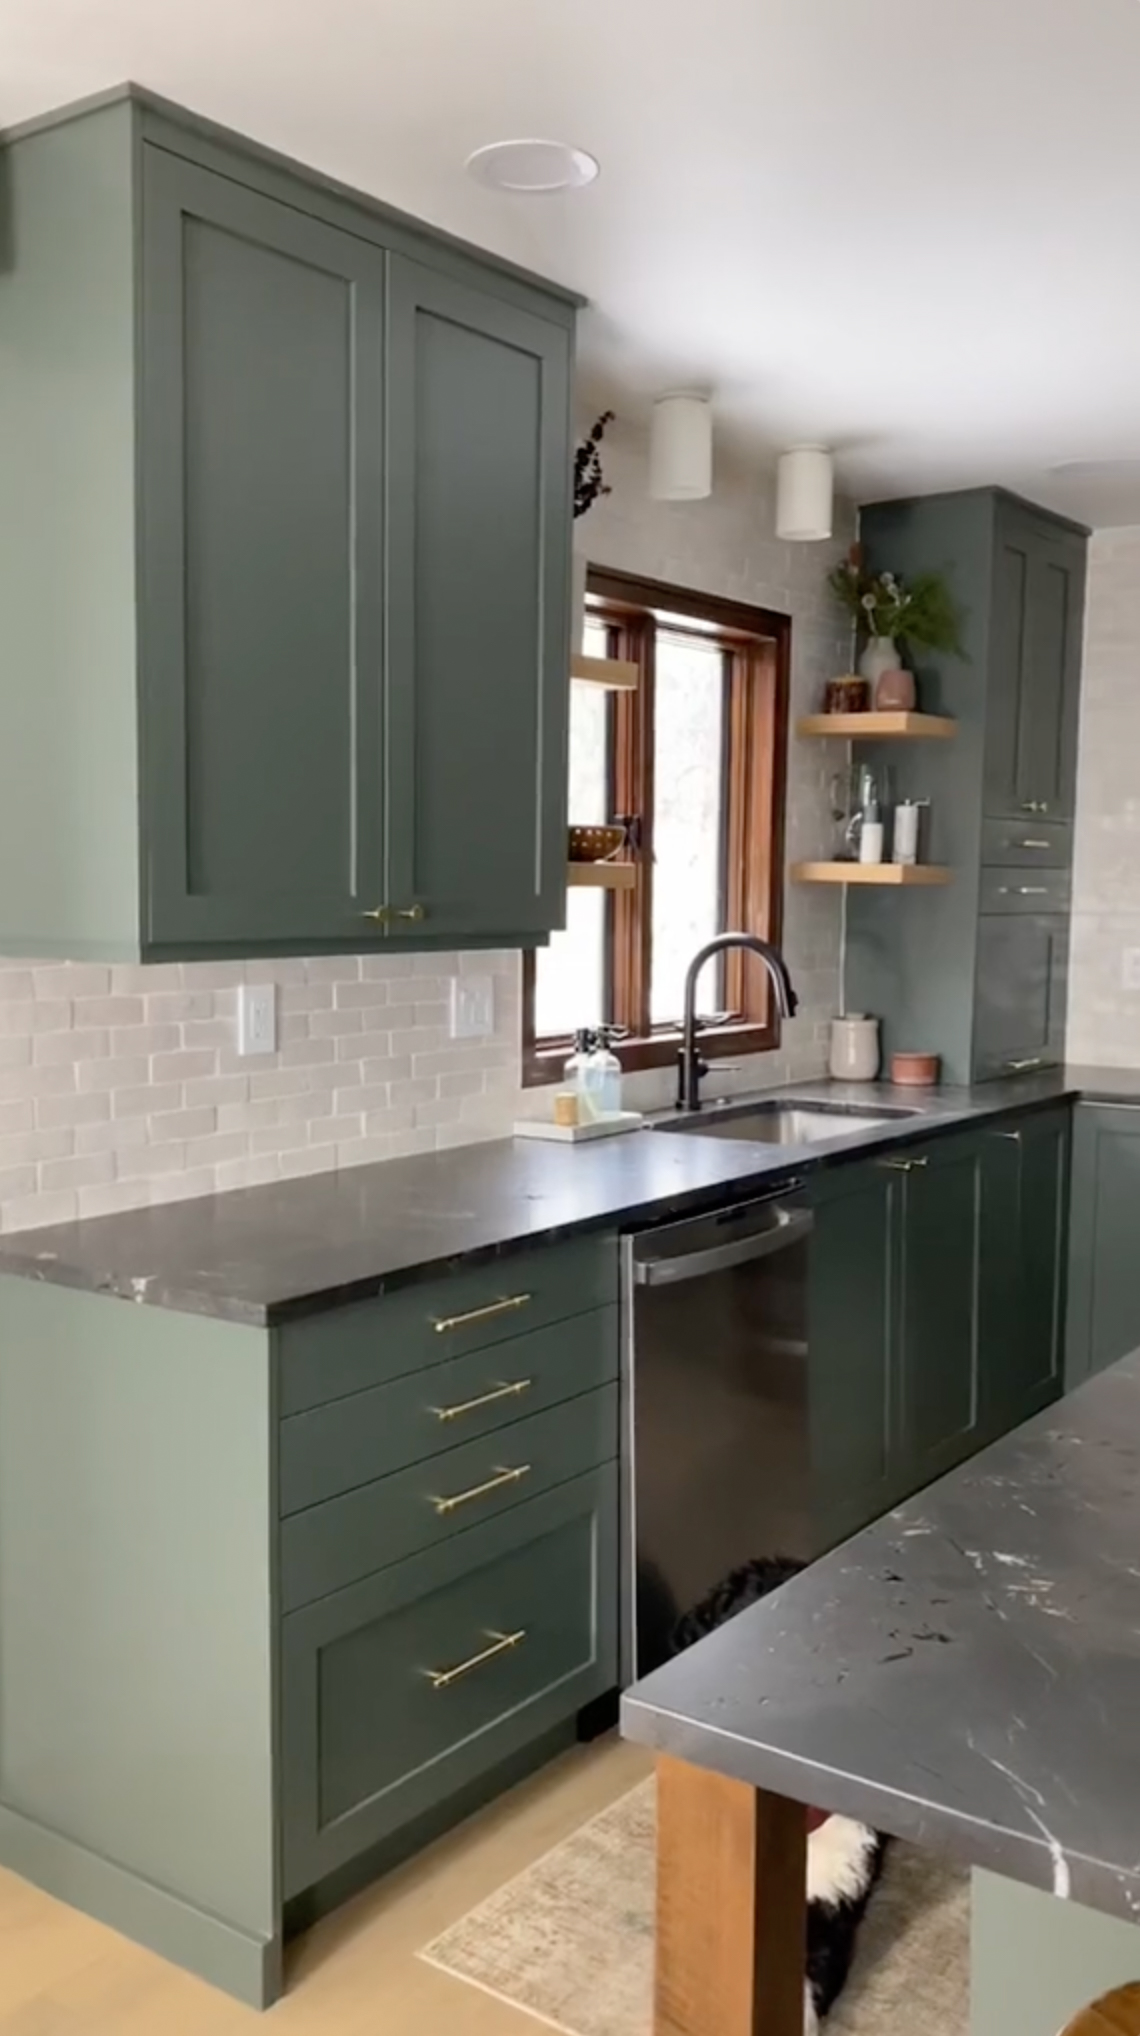 The couple began their home transformation by remodeling the kitchen